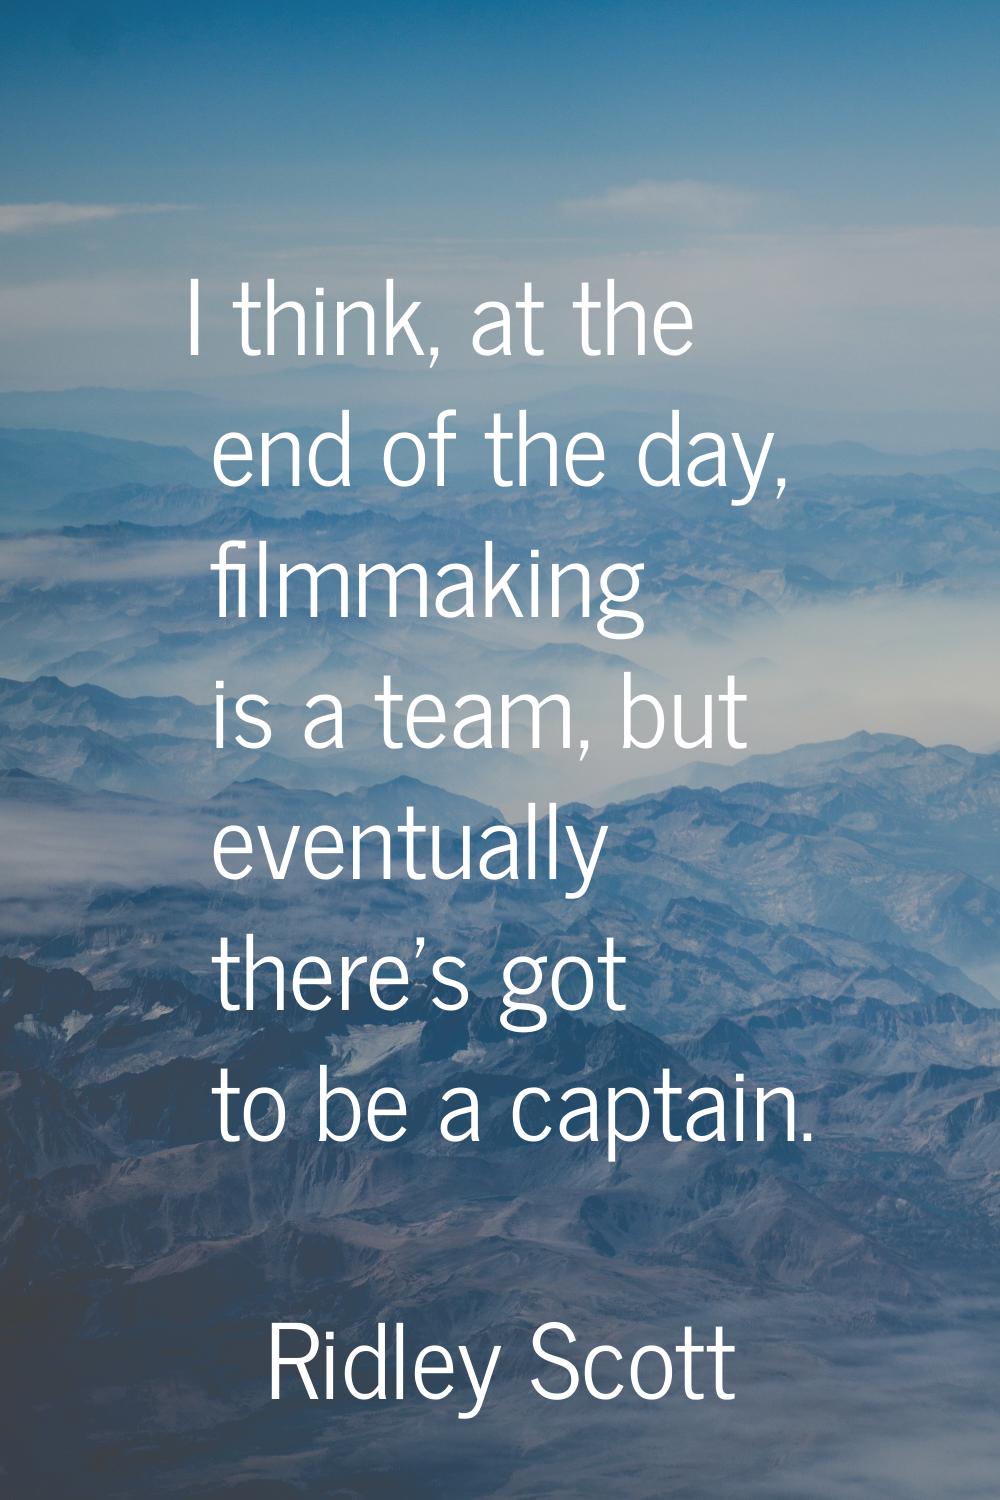 I think, at the end of the day, filmmaking is a team, but eventually there's got to be a captain.